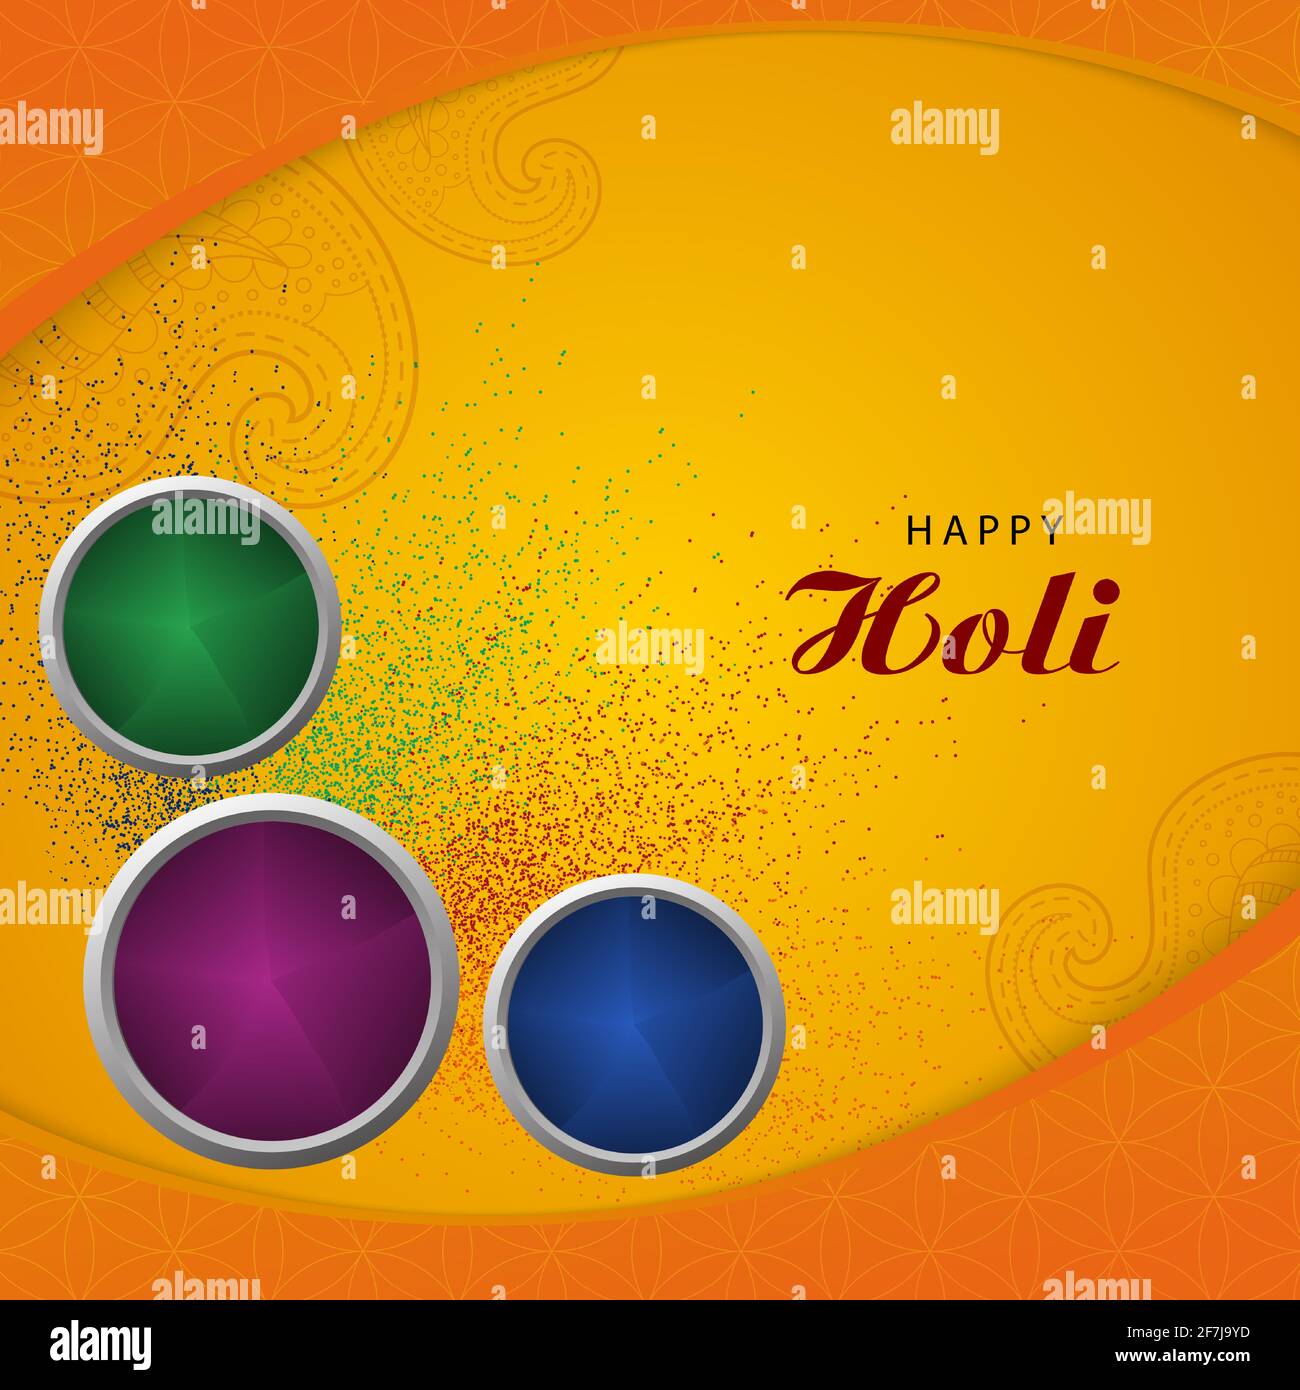 Holi wishes with Colors on yellow orange background for social ...